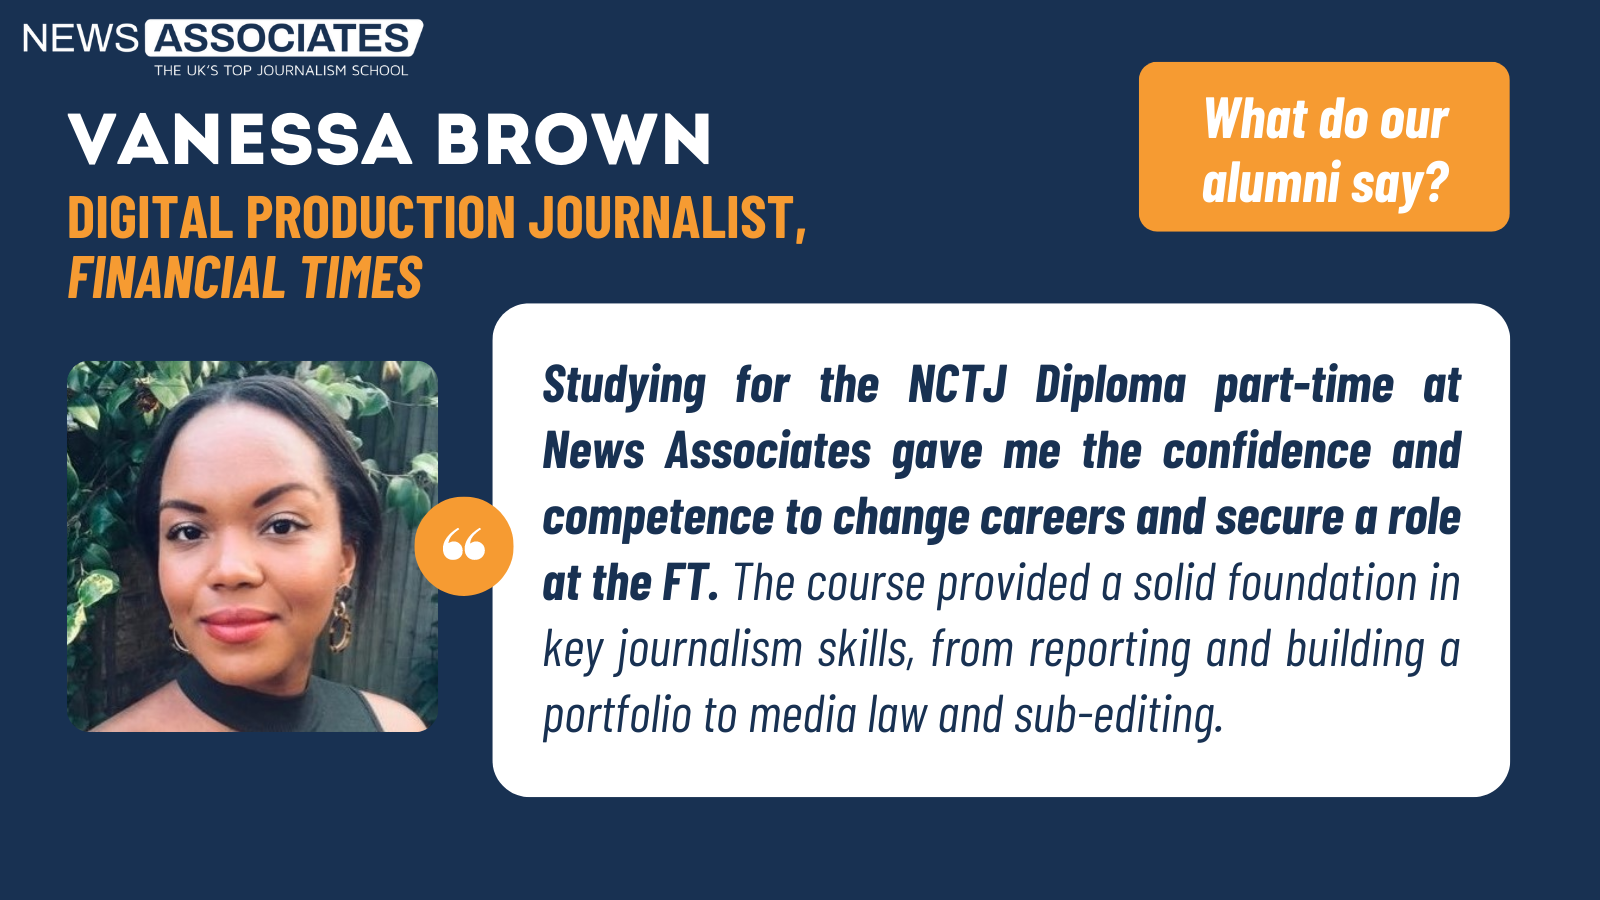 Studying for the NCTJ Diploma part-time at News Associates gave me the confidence and competence to change careers and secure a role at the FT. The course provided a solid foundation in key journalism skills, from reporting and building a portfolio to media law and sub-editing.